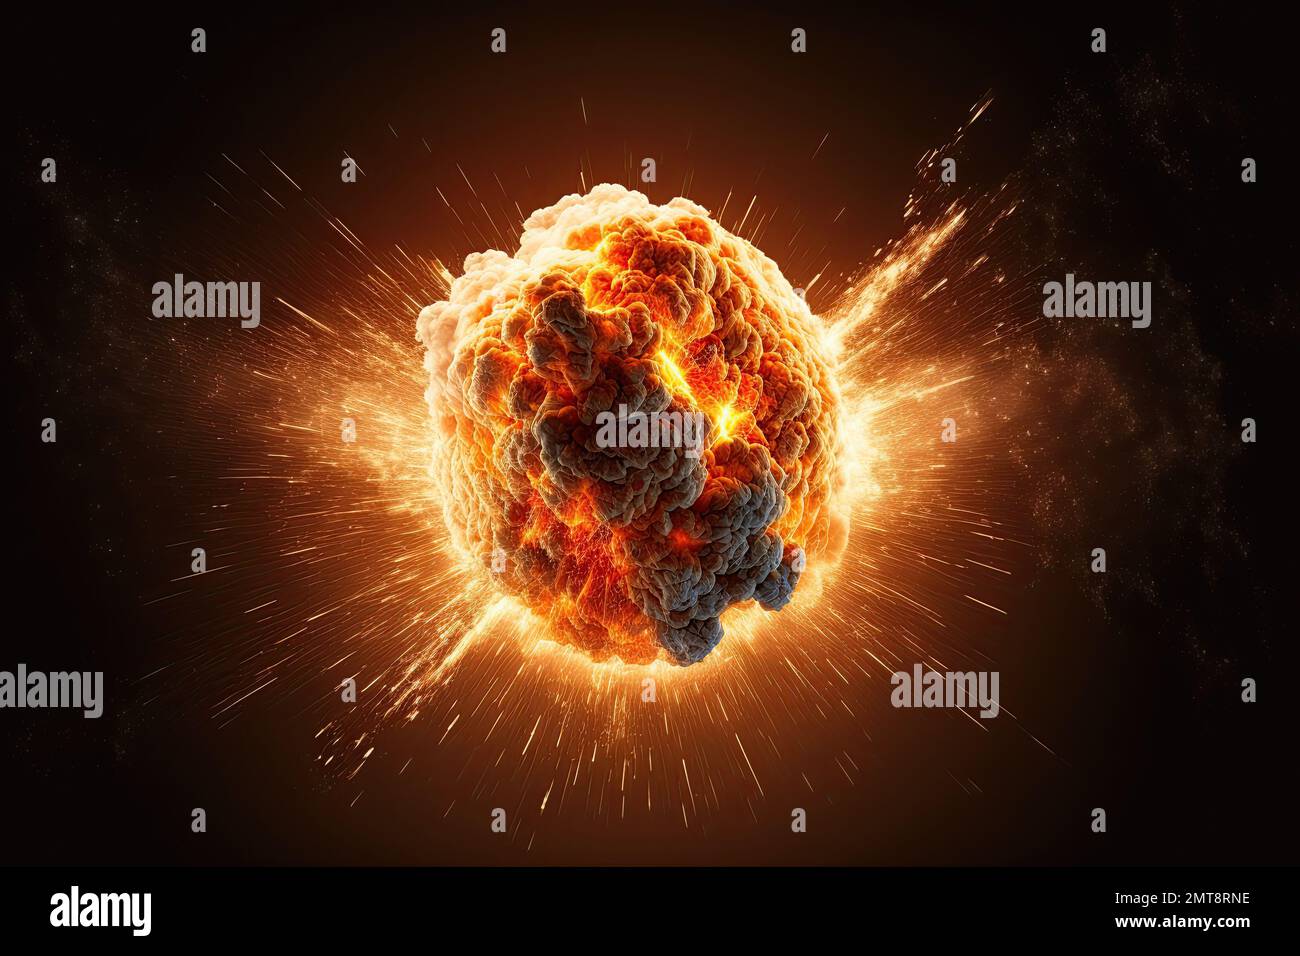 isolated explosion producing a fireball in a mushroom cloud, created by a war-related blast in a dark background, is conjured up by an apocalyptic Stock Photo